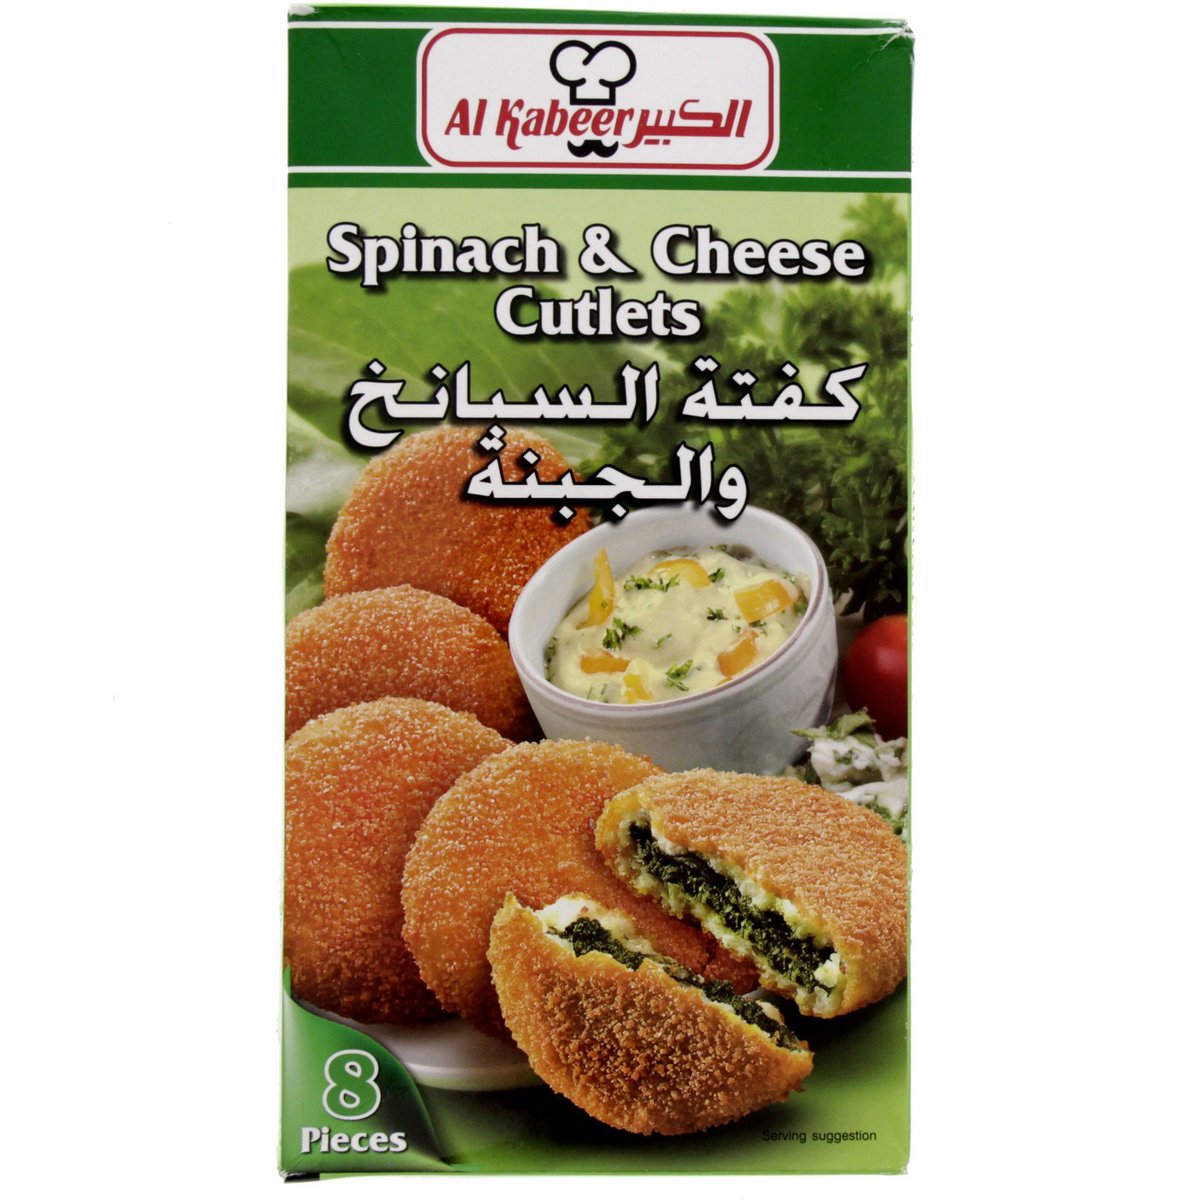 Al Kabeer Spinach & Cheese Cutlets 320 g